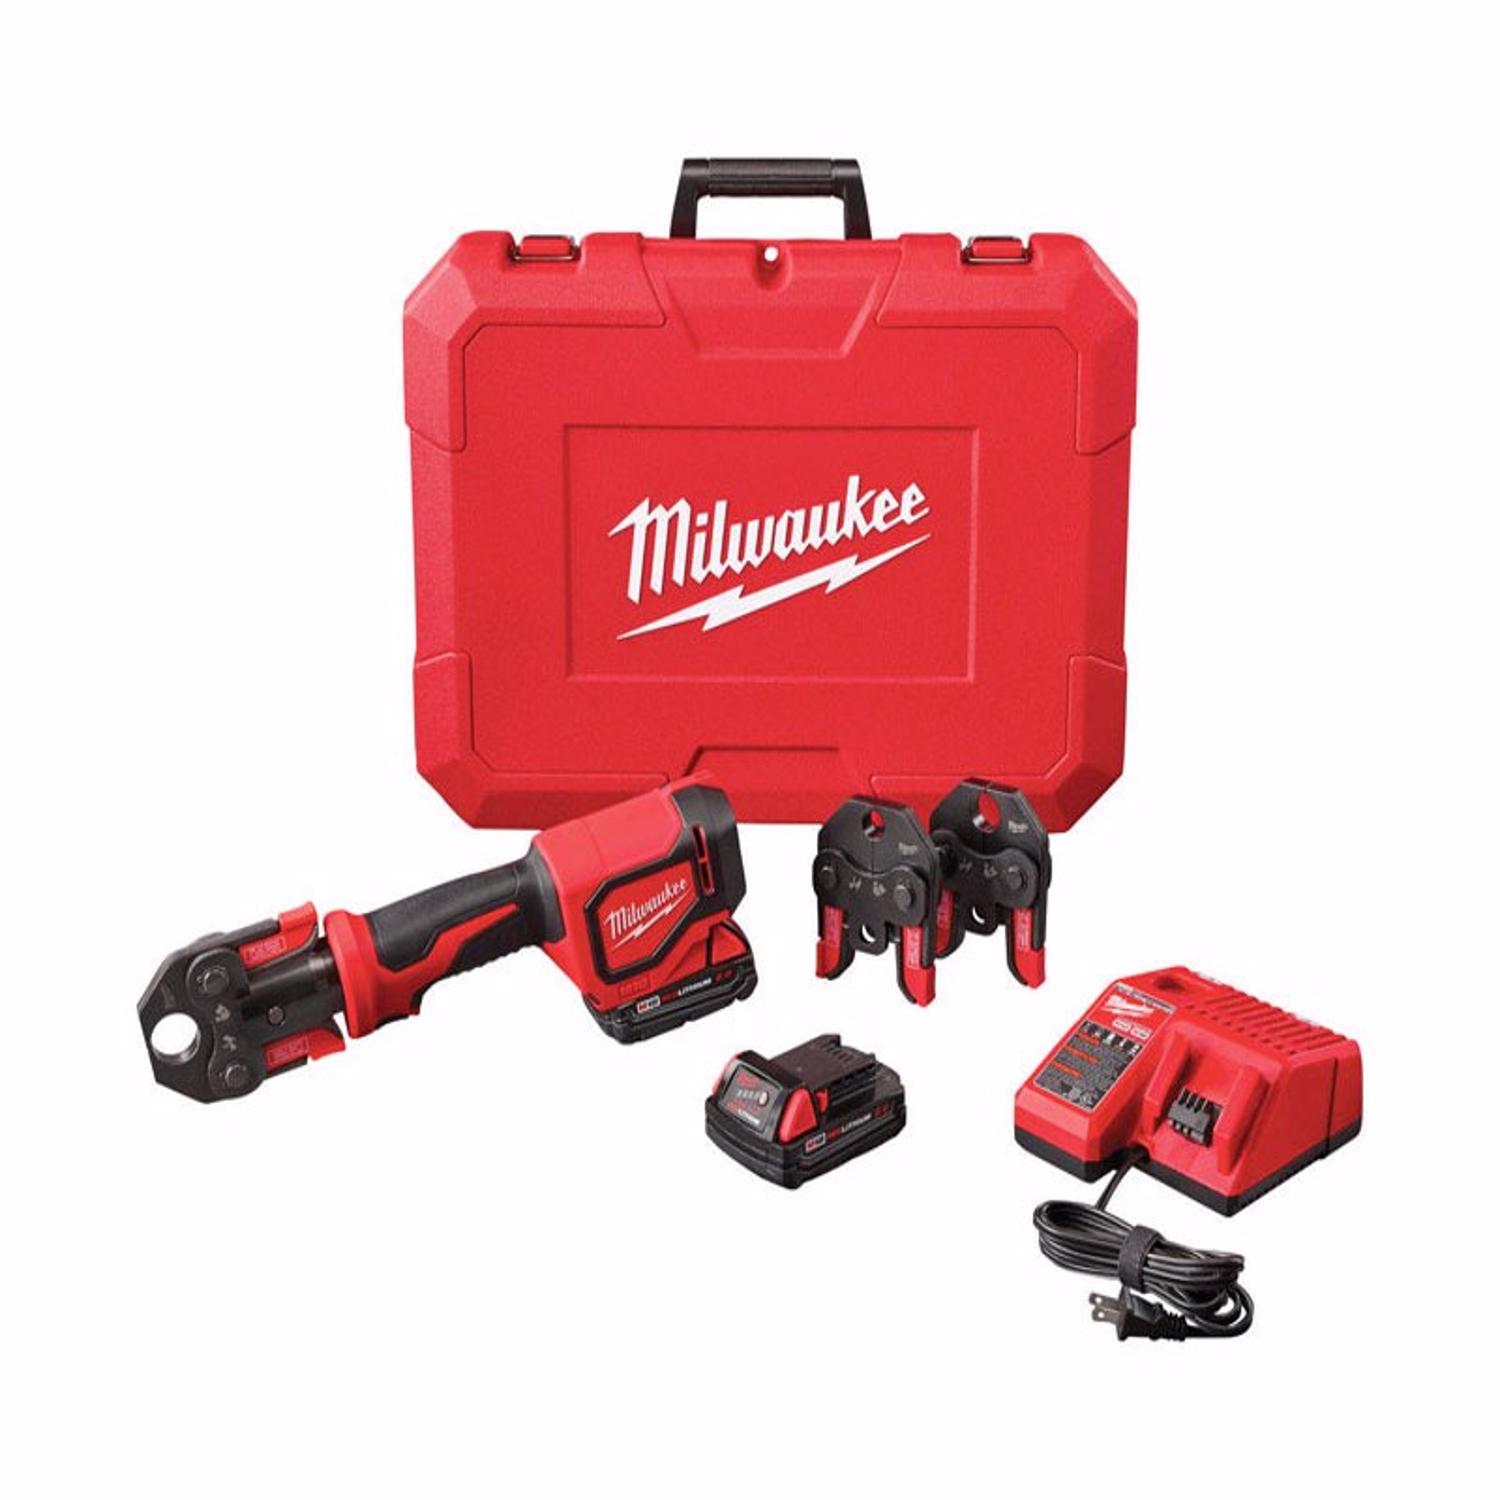 Photos - Other for Construction Milwaukee M18 Force Logic w/ 3 PEX Crimp Jaws 1 in. Press Tool Kit Red 267 